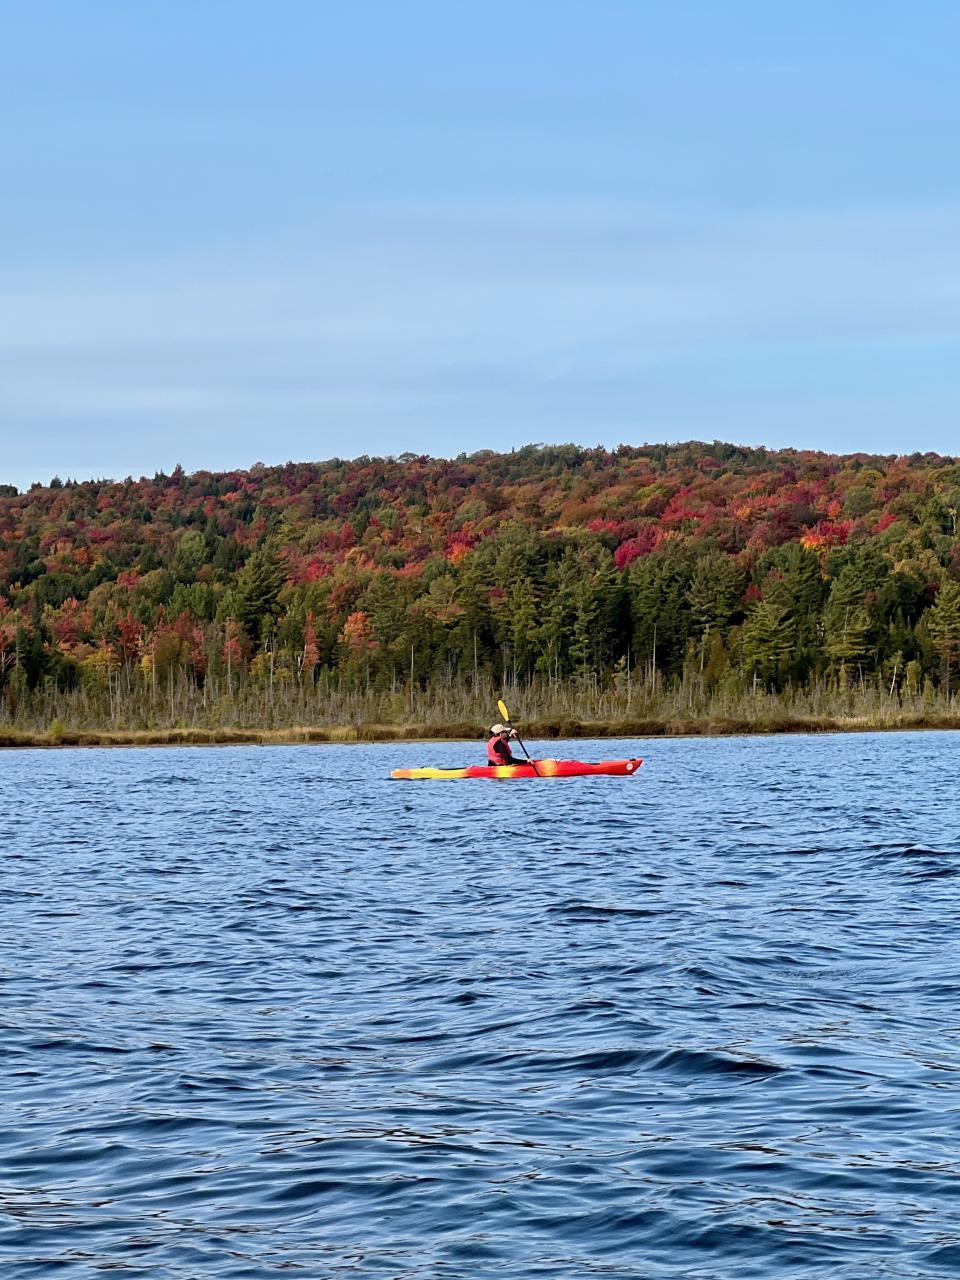 A view of a kayaker paddling a waterway with peak fall foliage on the distant shore